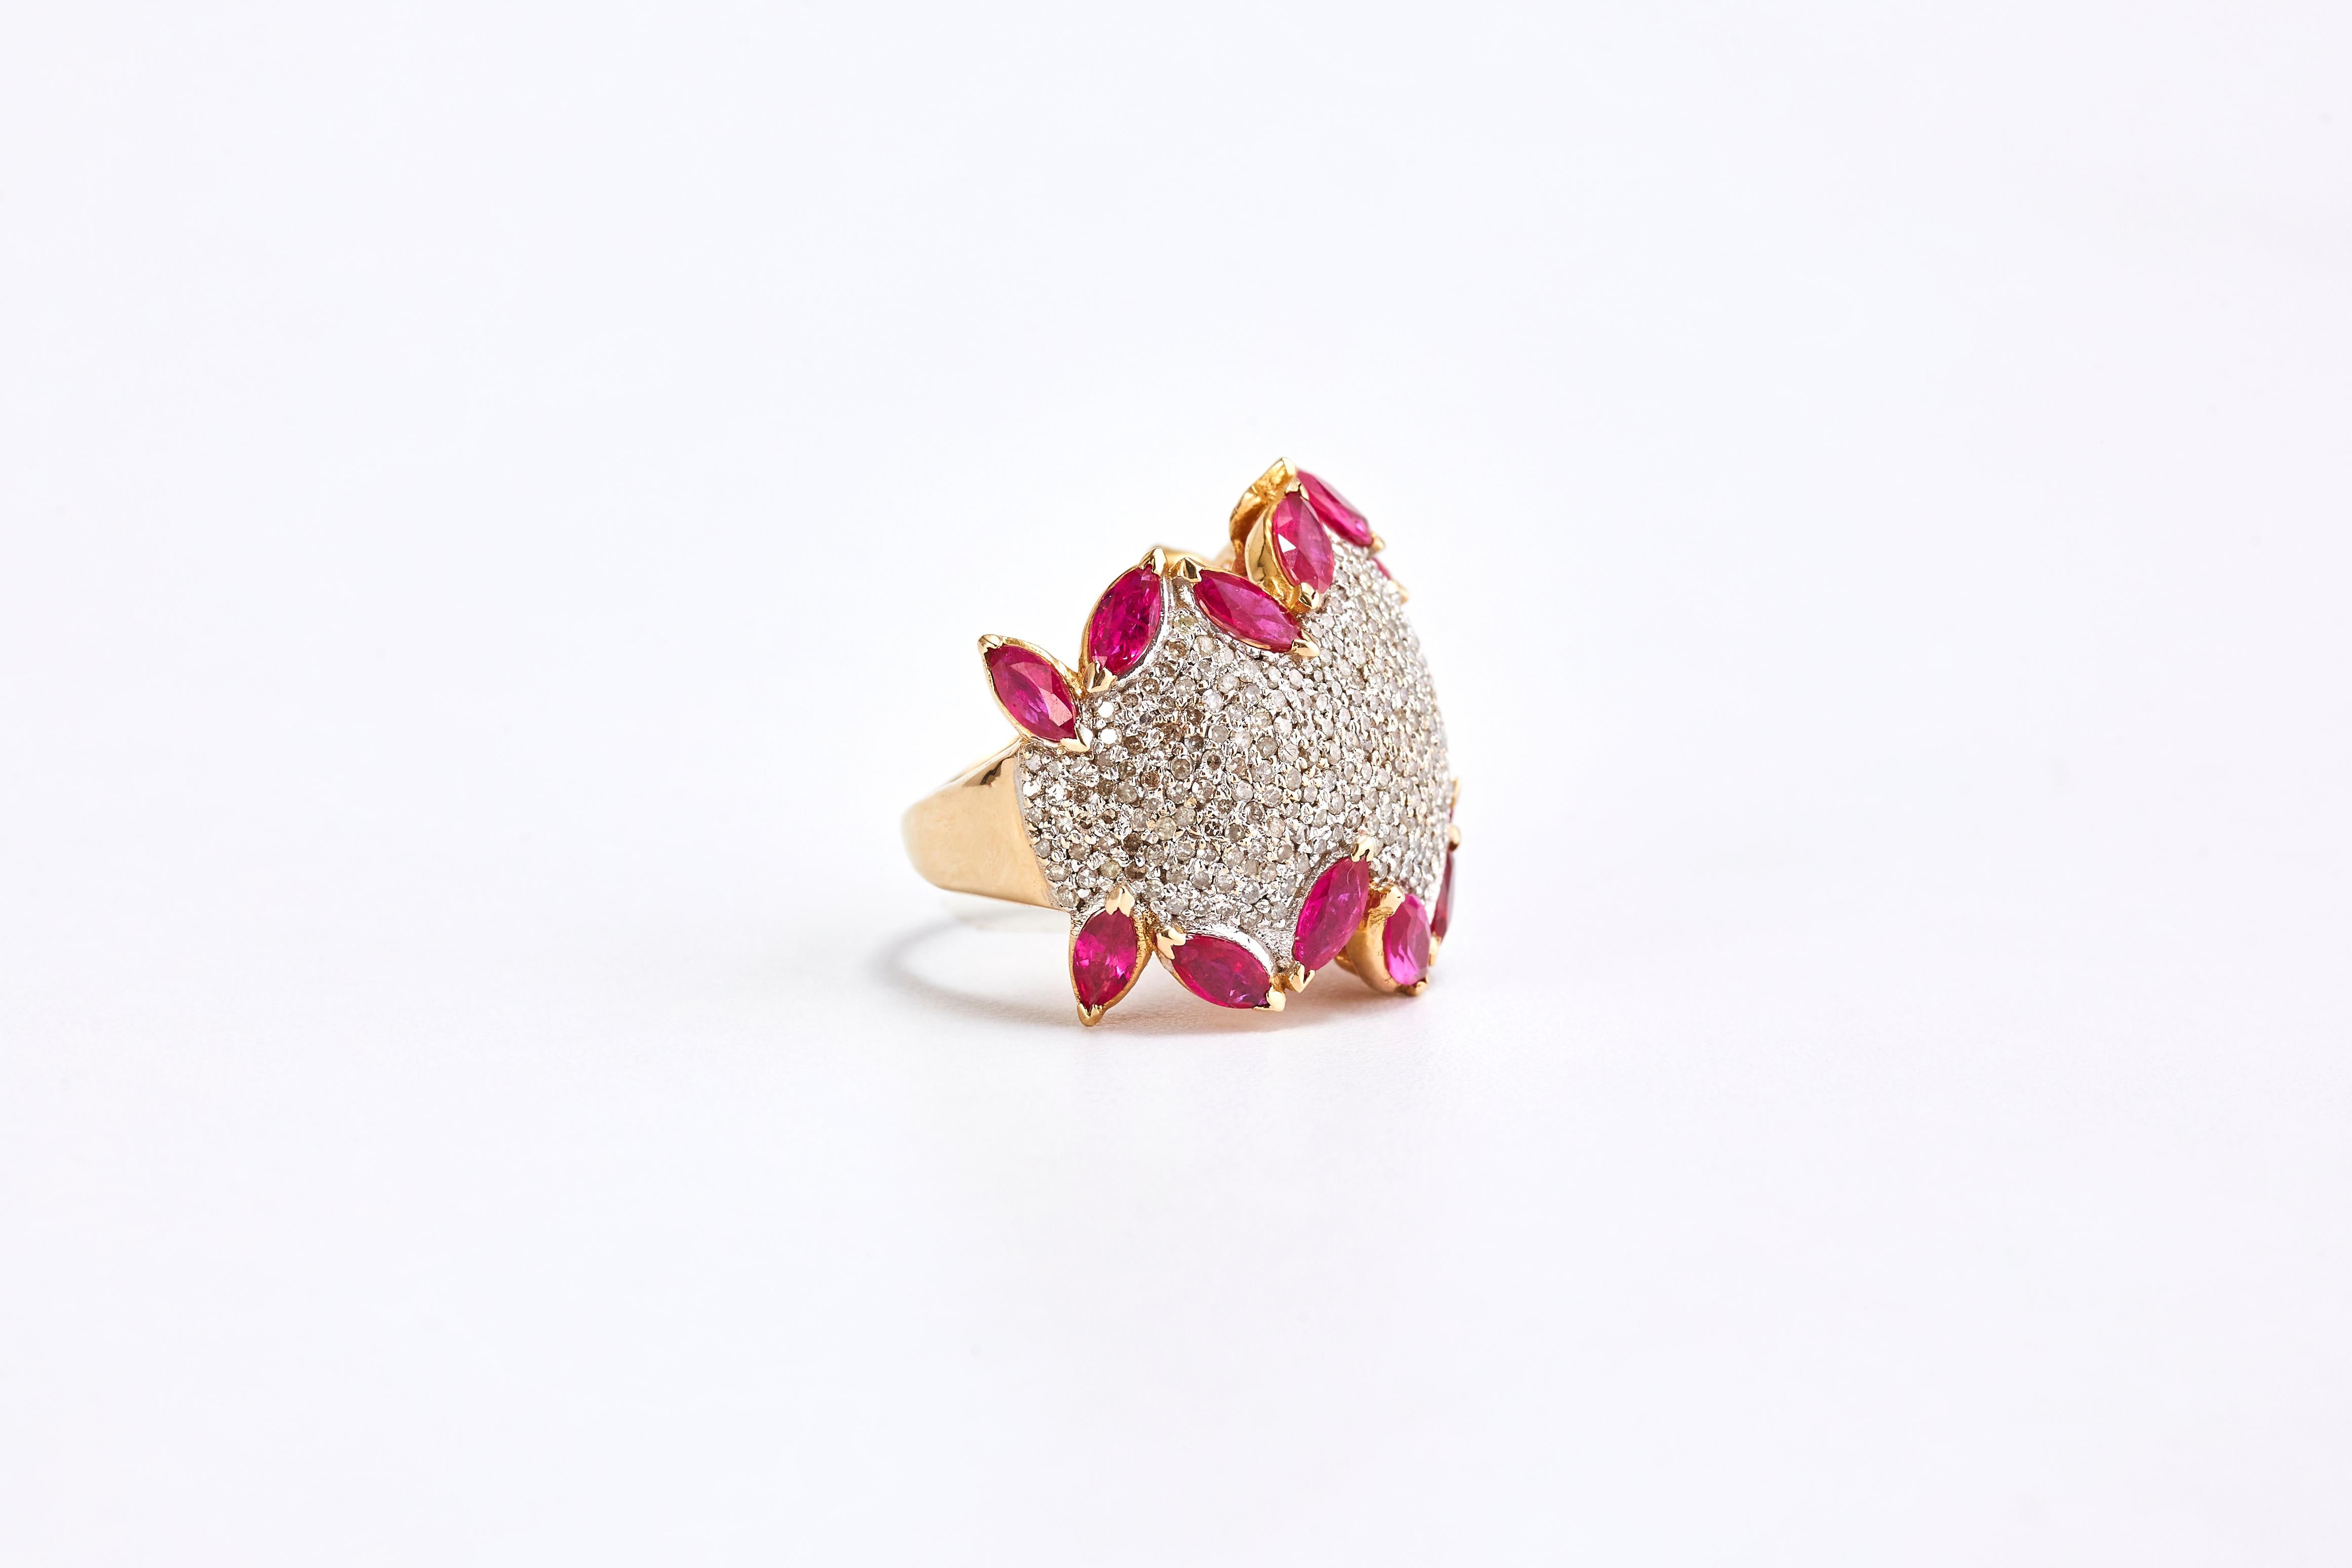 14 Karat Yellow Gold Ring with Diamonds and Rubies

Yellow gold ring with round cut diamonds and twelve marquise cut rubies around. Rich and stunning design.
8.15 ct of Rubies. 4.10 ct of Diamonds each one is approx. 0.1 ct.
Total weight: 14 grams.